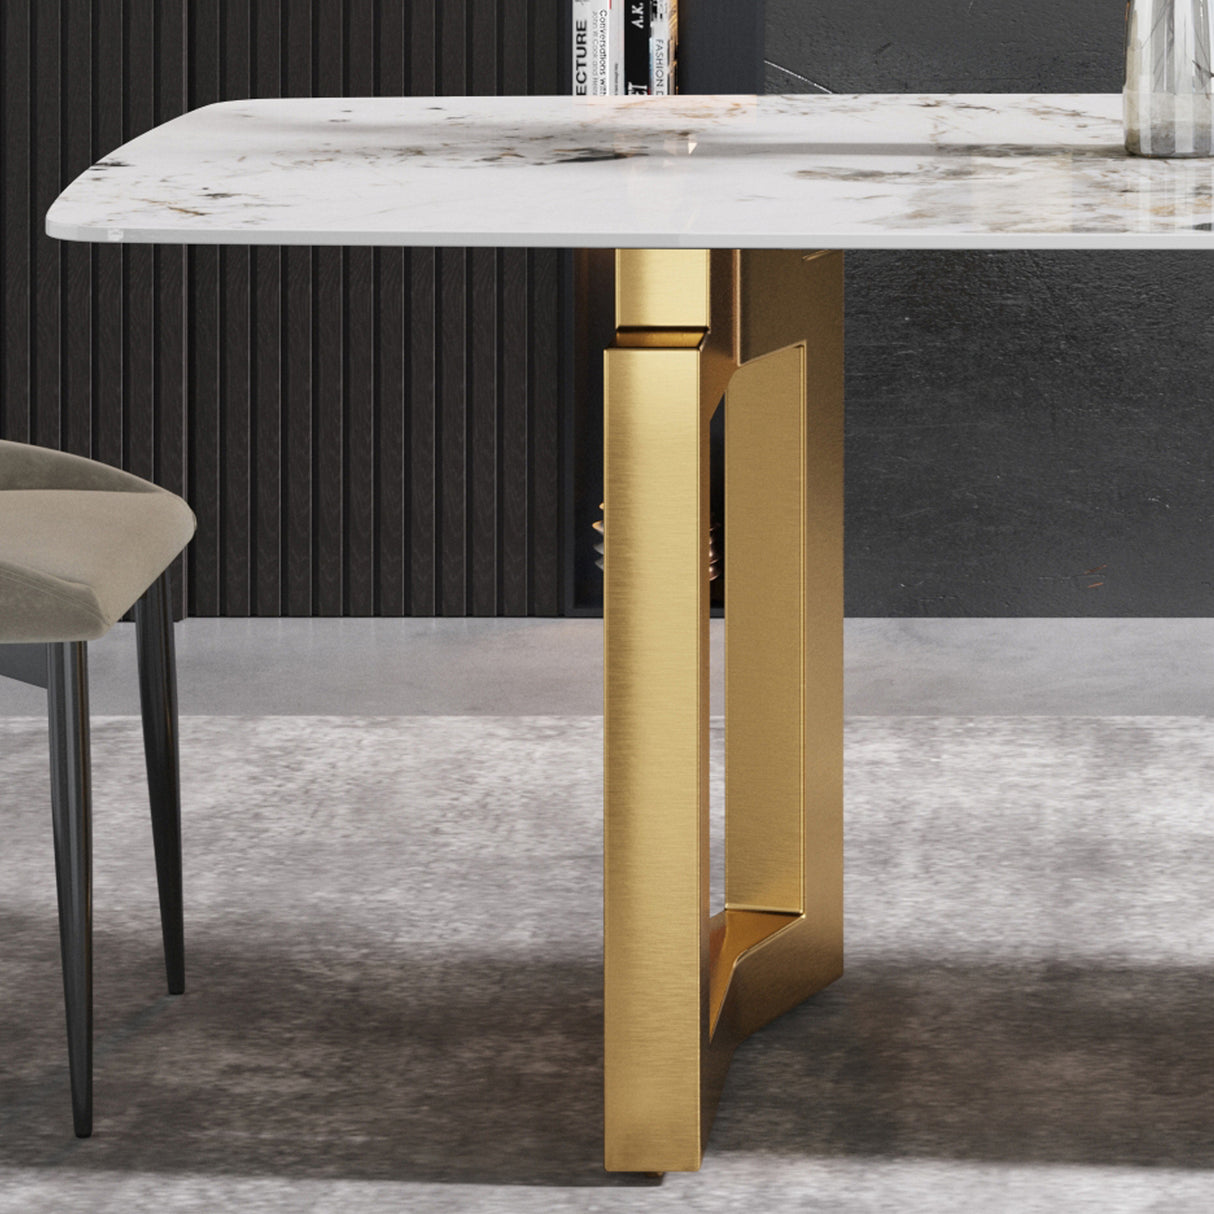 63"Modern artificial stone pandora white curved golden metal leg dining table -6 people - Home Elegance USA